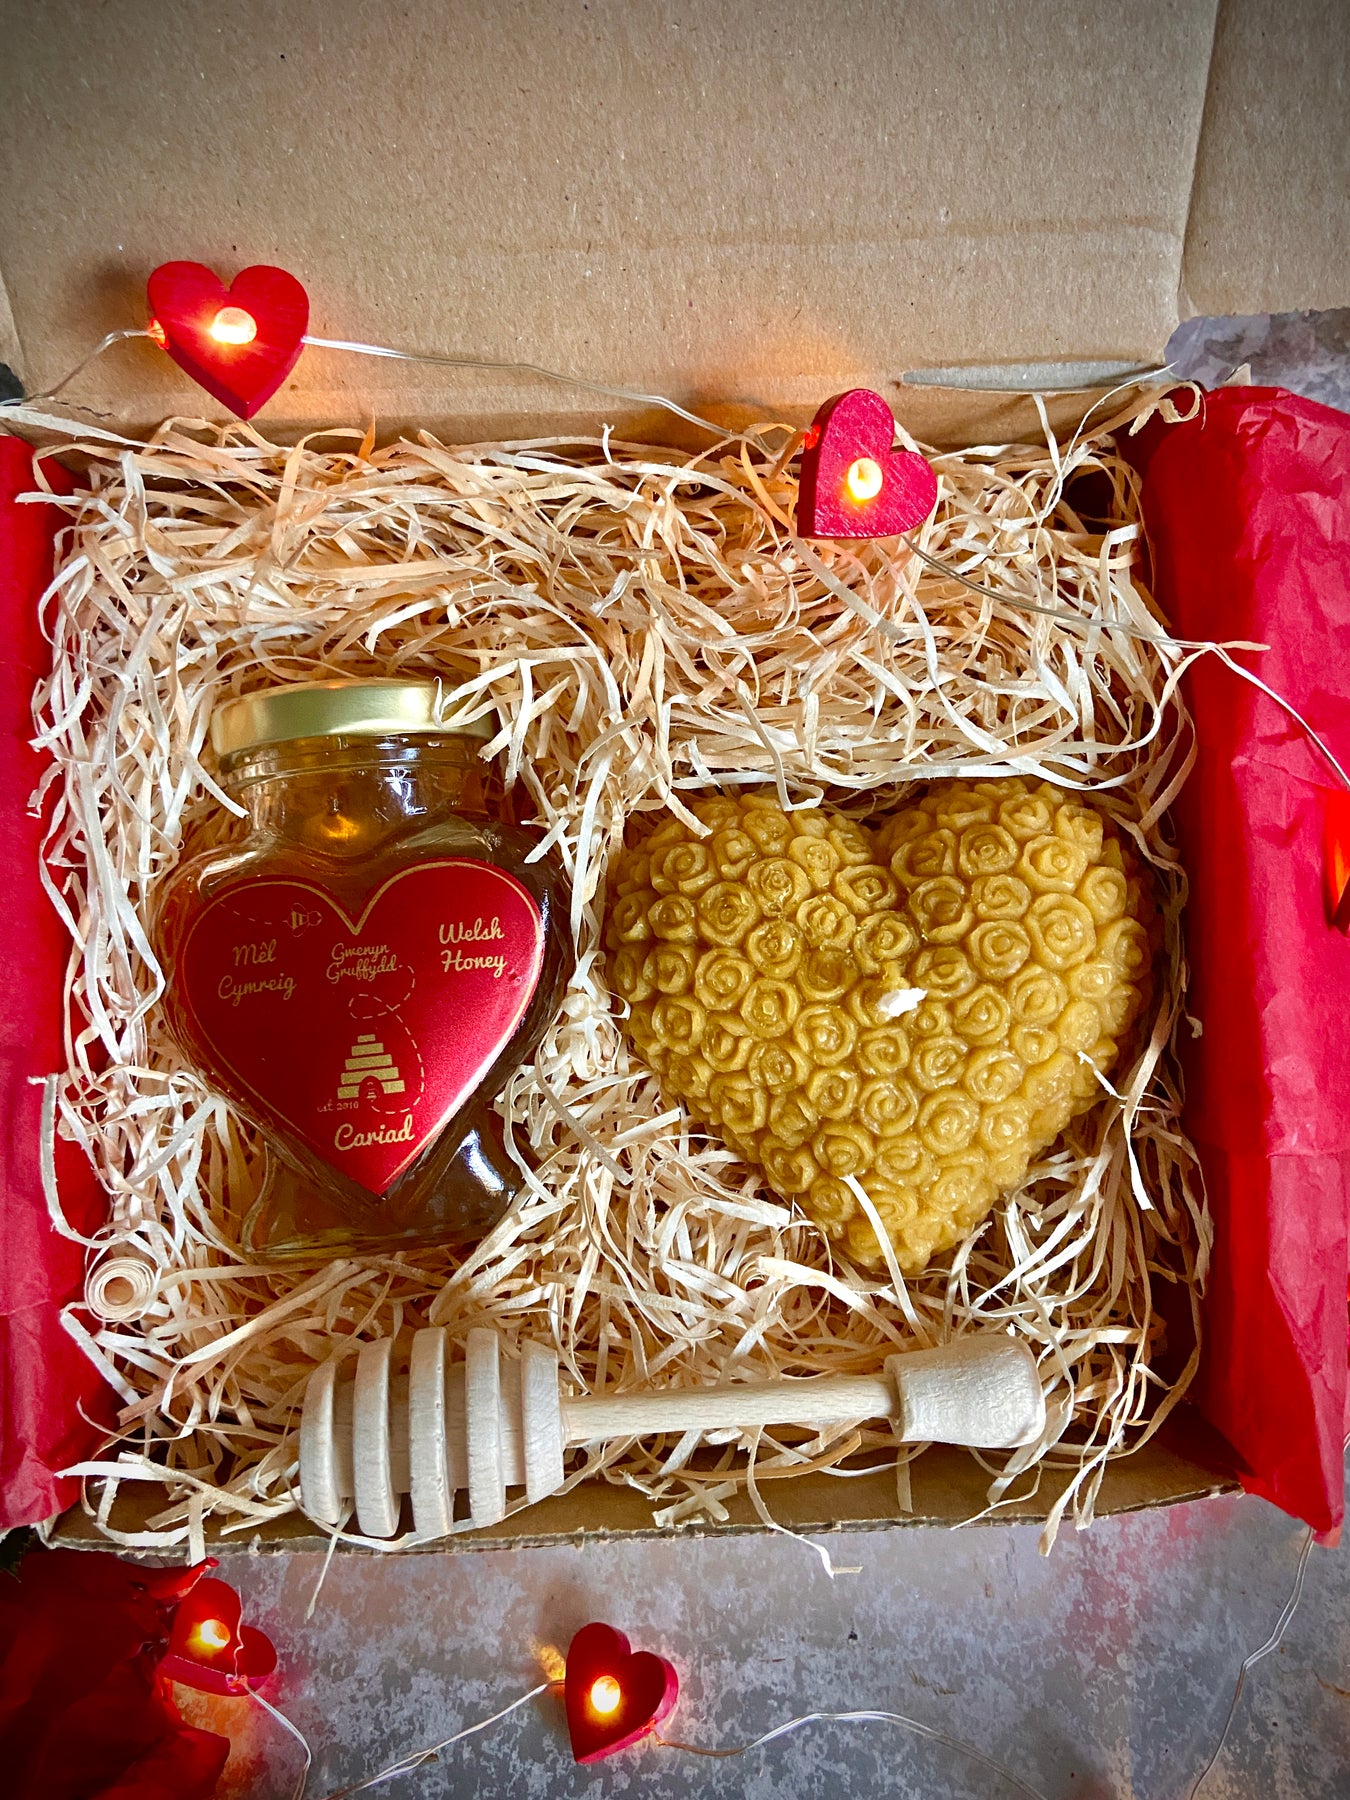 Valentines Candles - Box of 9 Little Heart Shaped Beeswax Candles